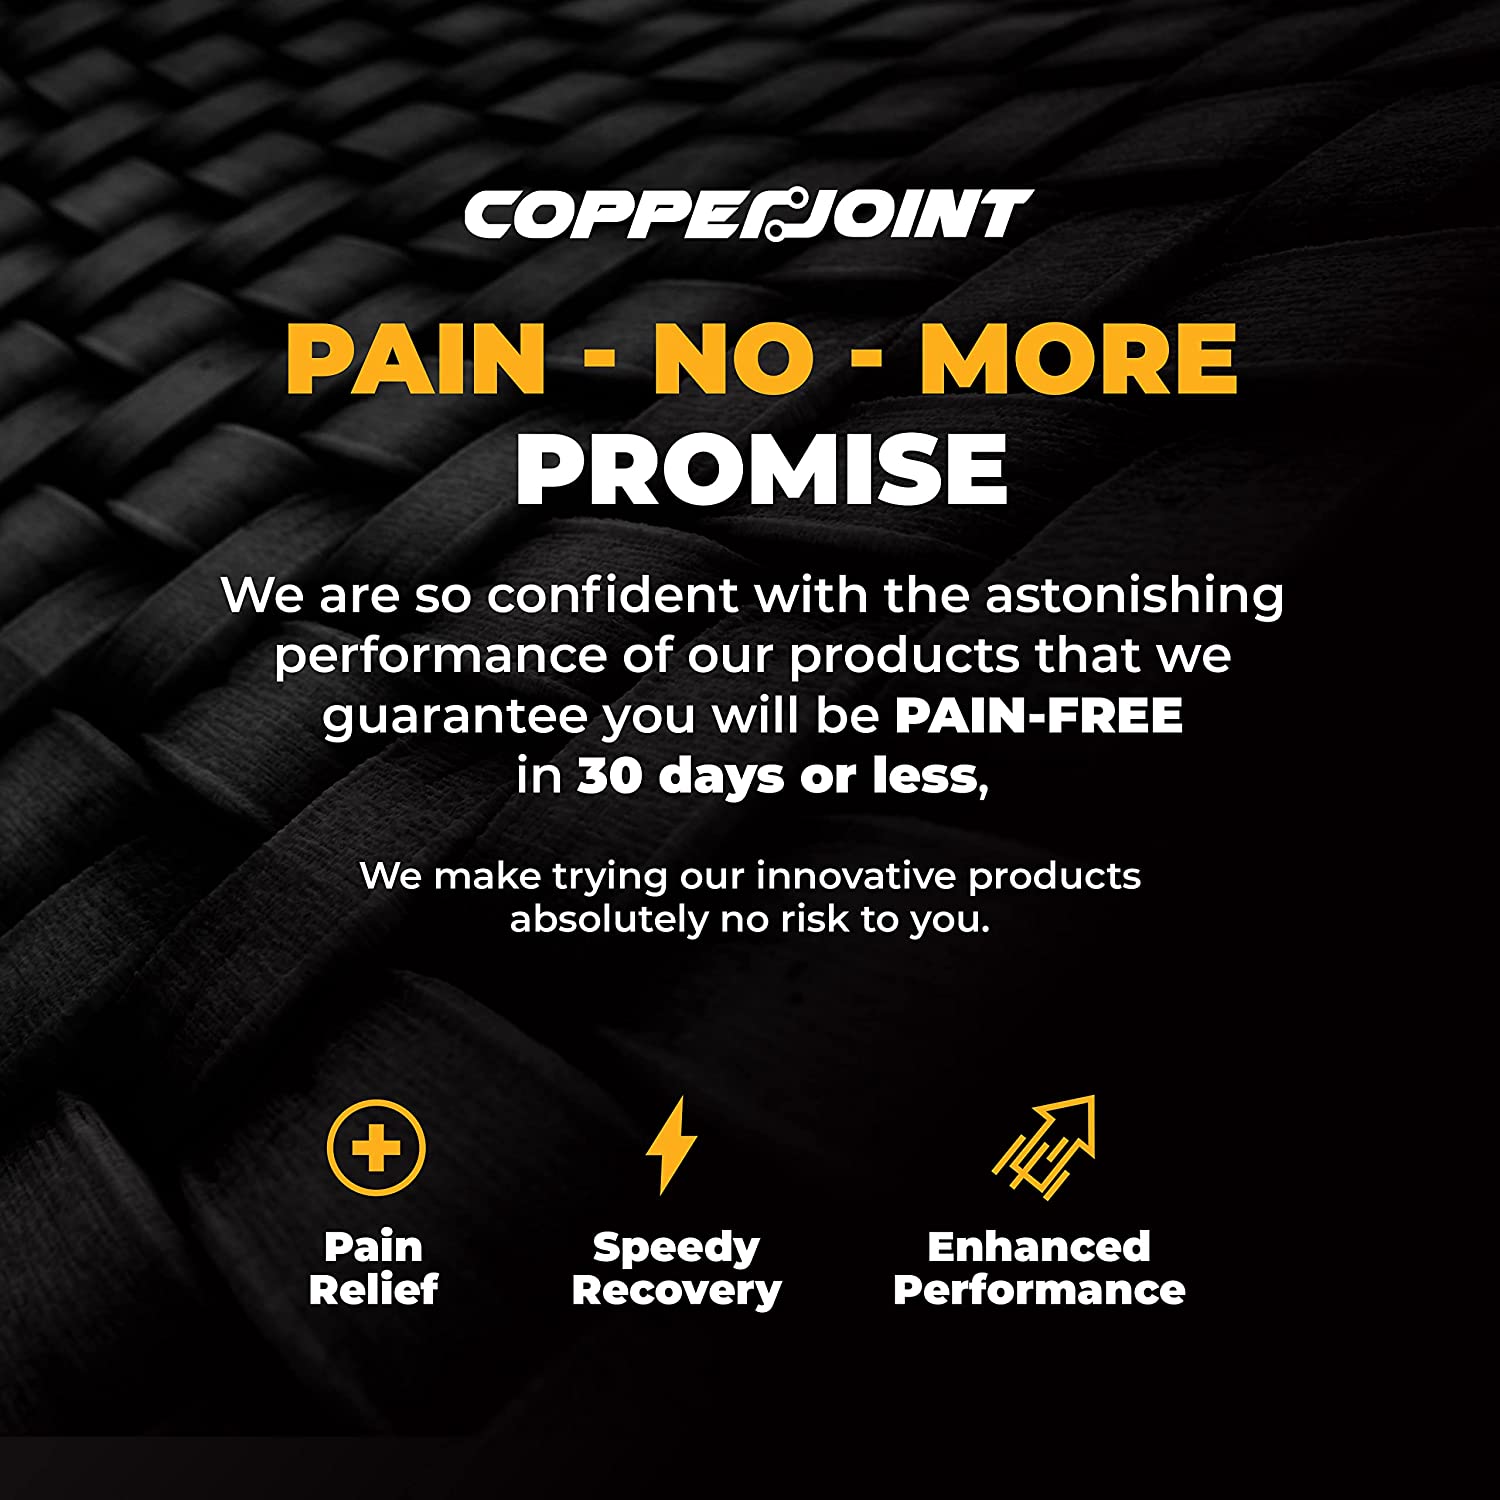 CopperJoint Drop Foot Brace For Walking Launch Ends on a High After Exceptional Sales